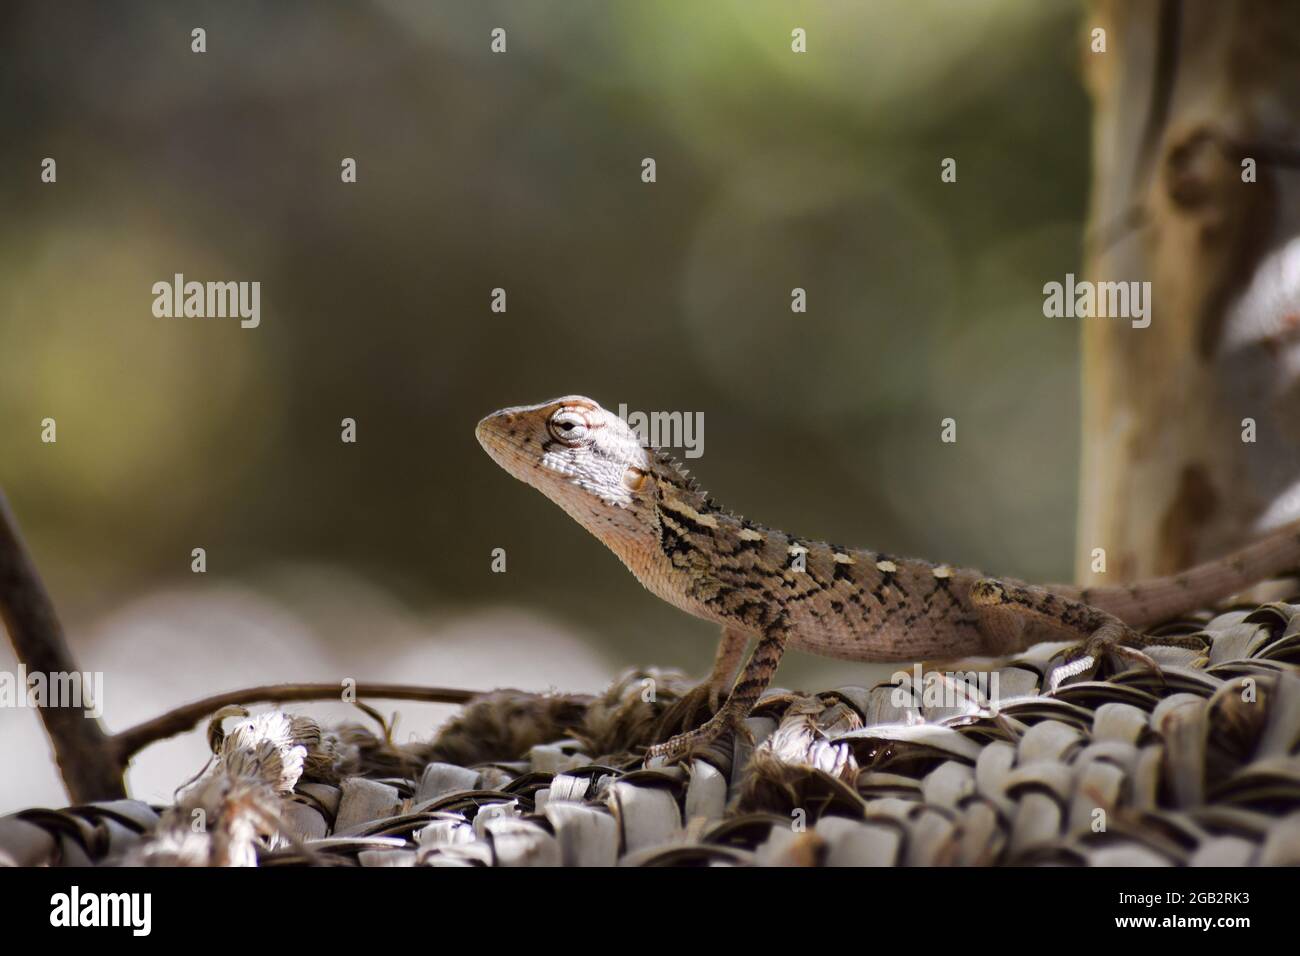 lizard on green grass plant leaf wildlife animal close up natural background reptile outdoors Stock Photo